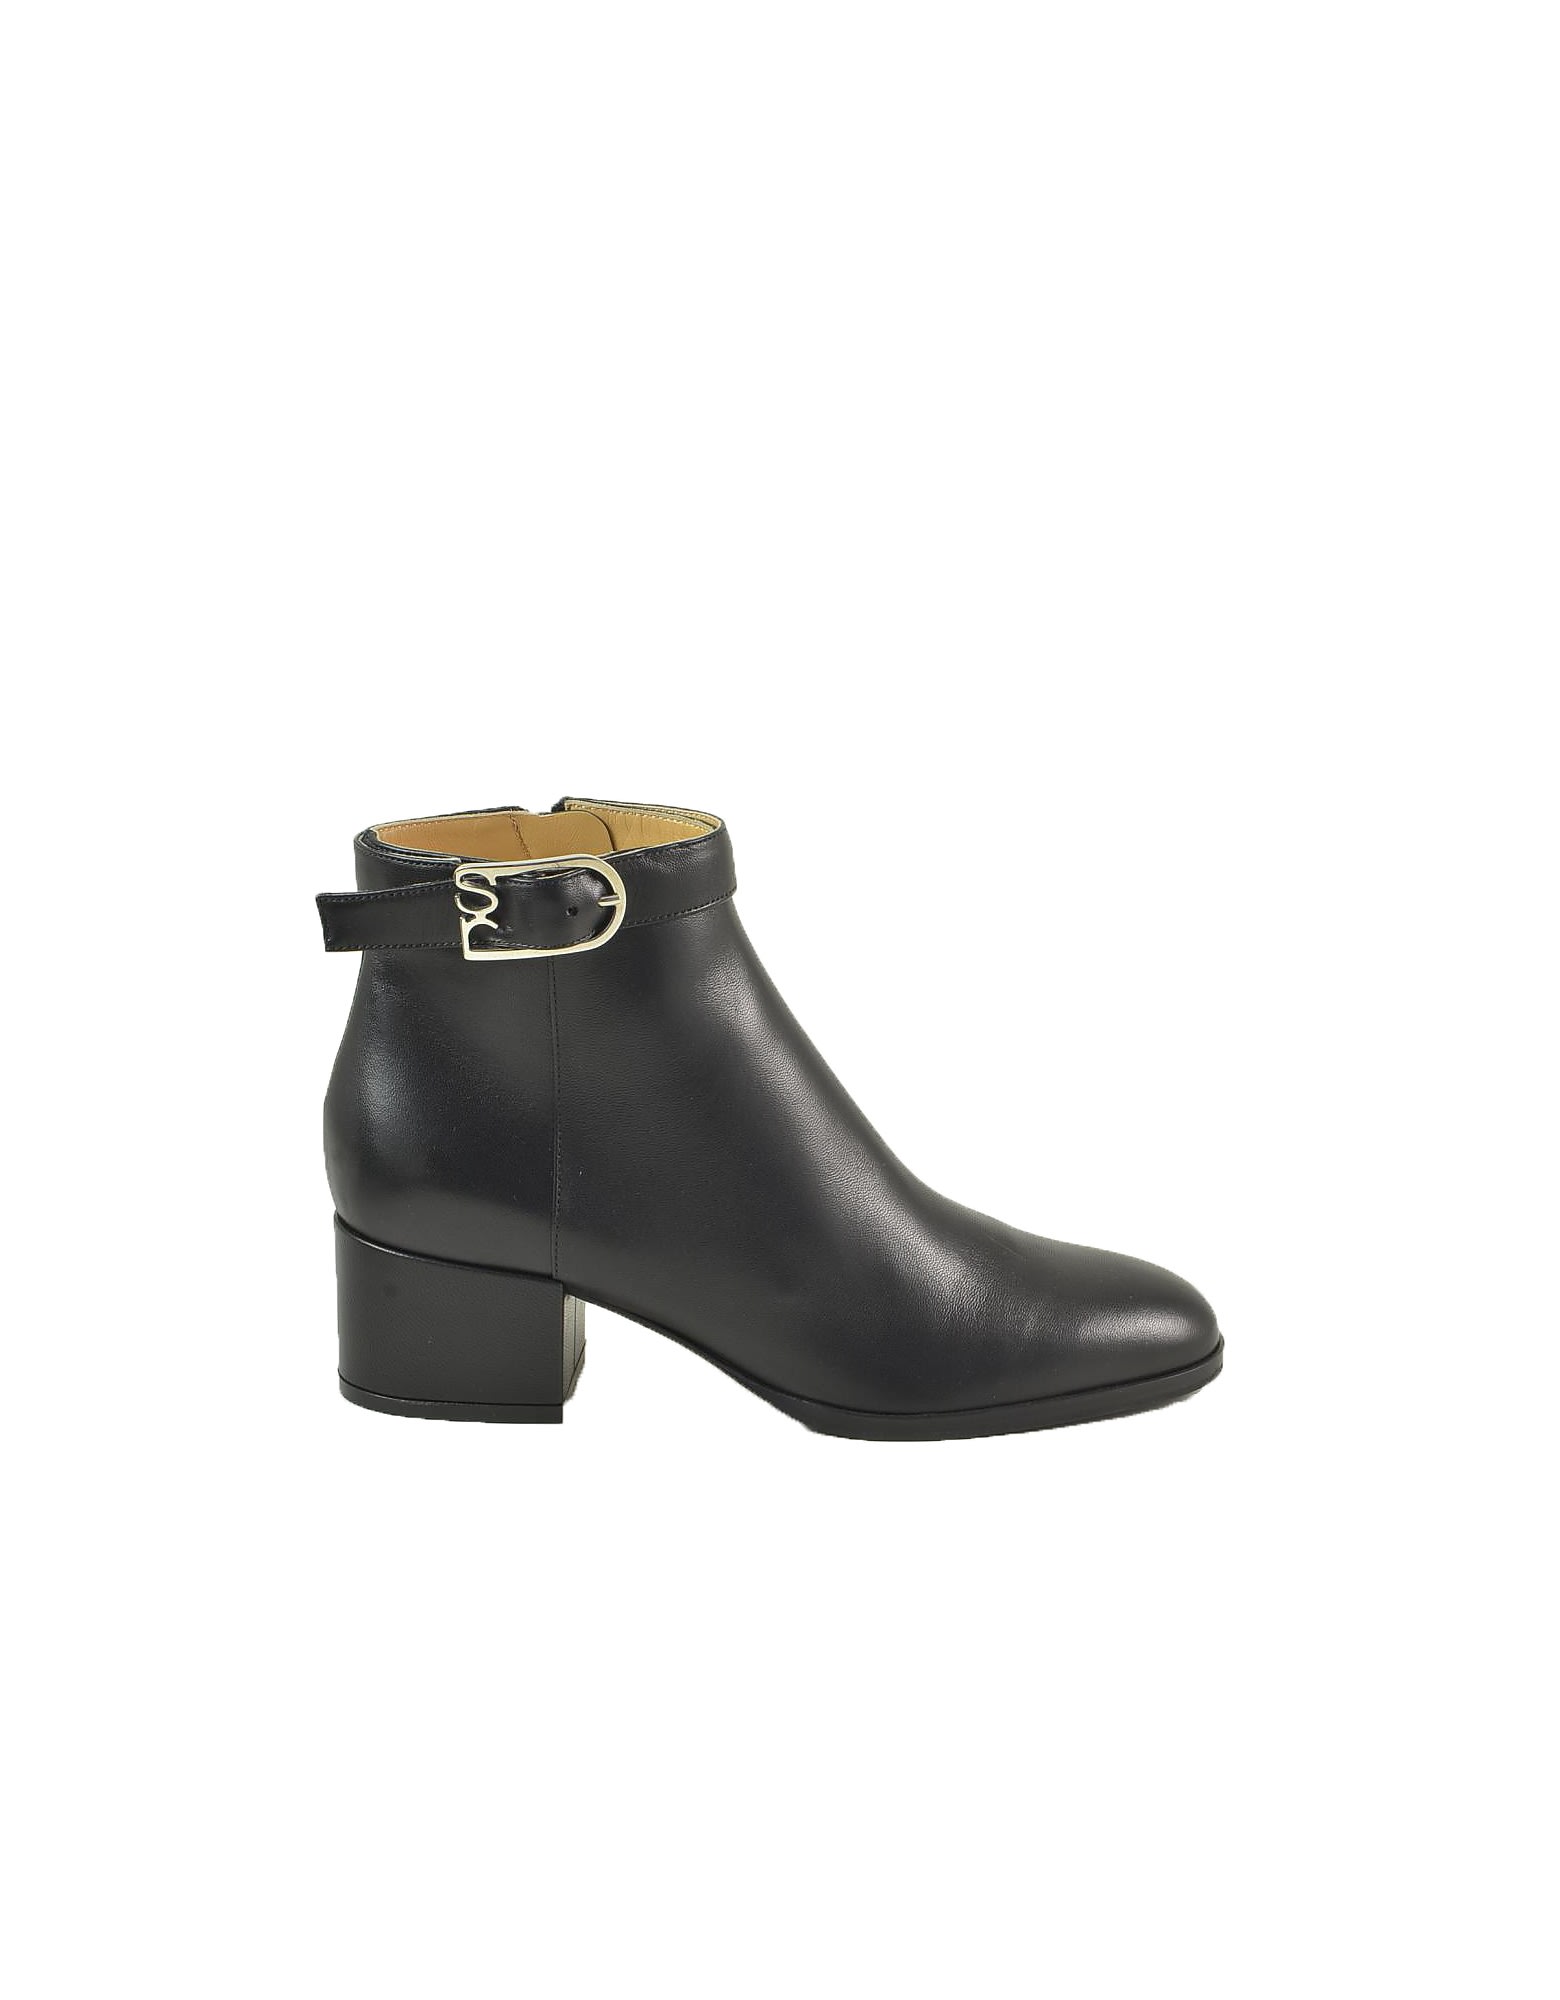 Sergio Rossi Black Smooth Leather Booties W/signature Buckle